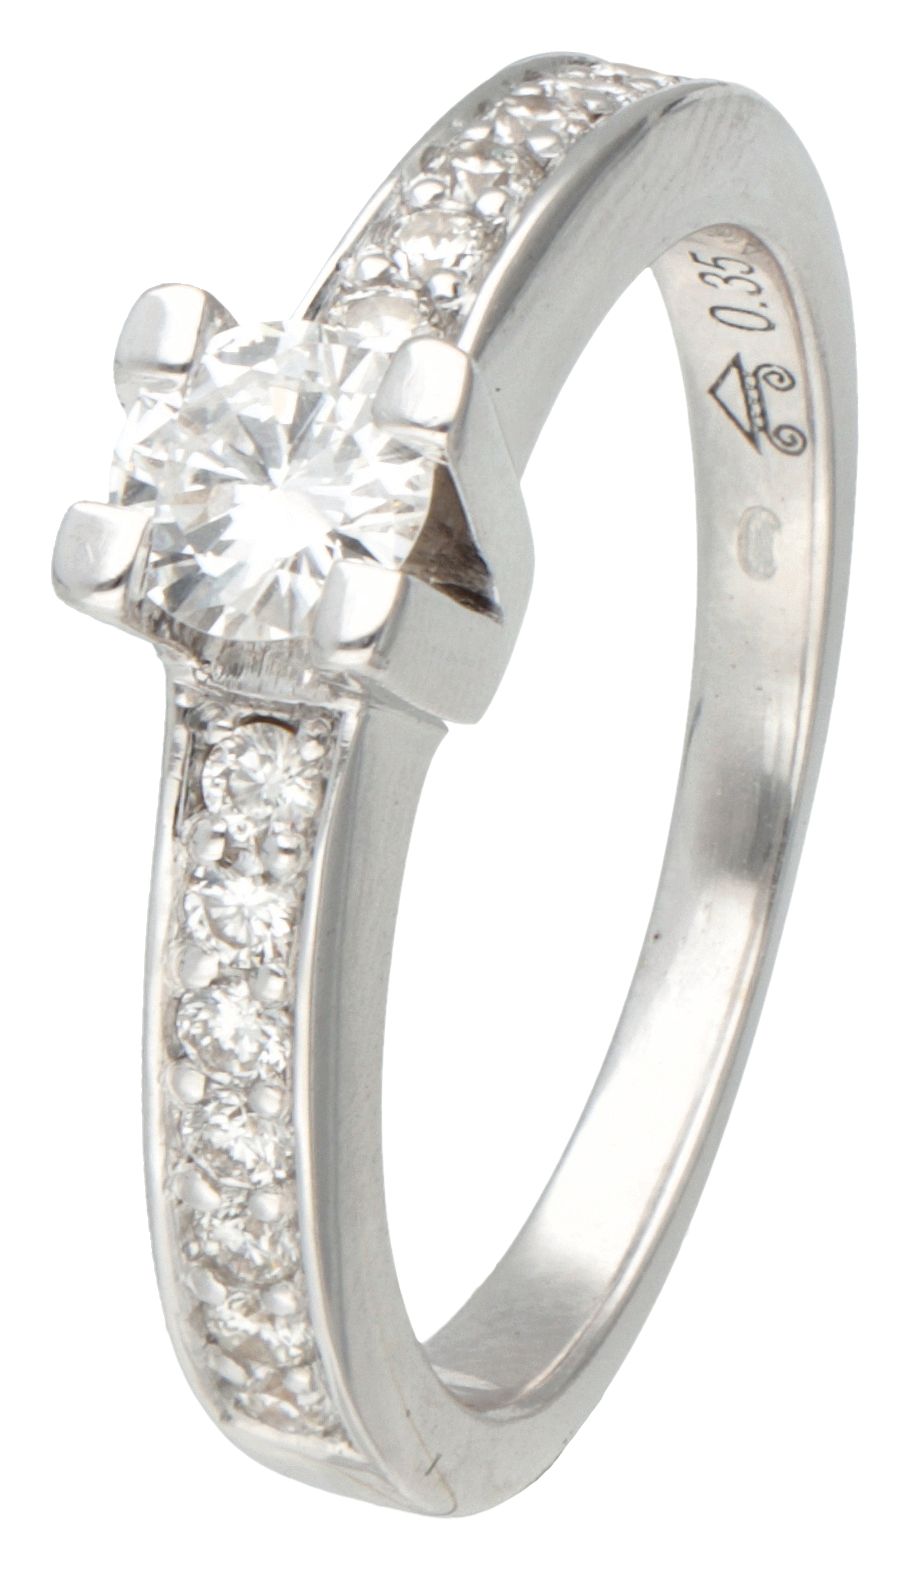 14K. White gold shoulder ring set with approx. 0.62 ct. Diamond. Hallmarks: 585.&hellip;